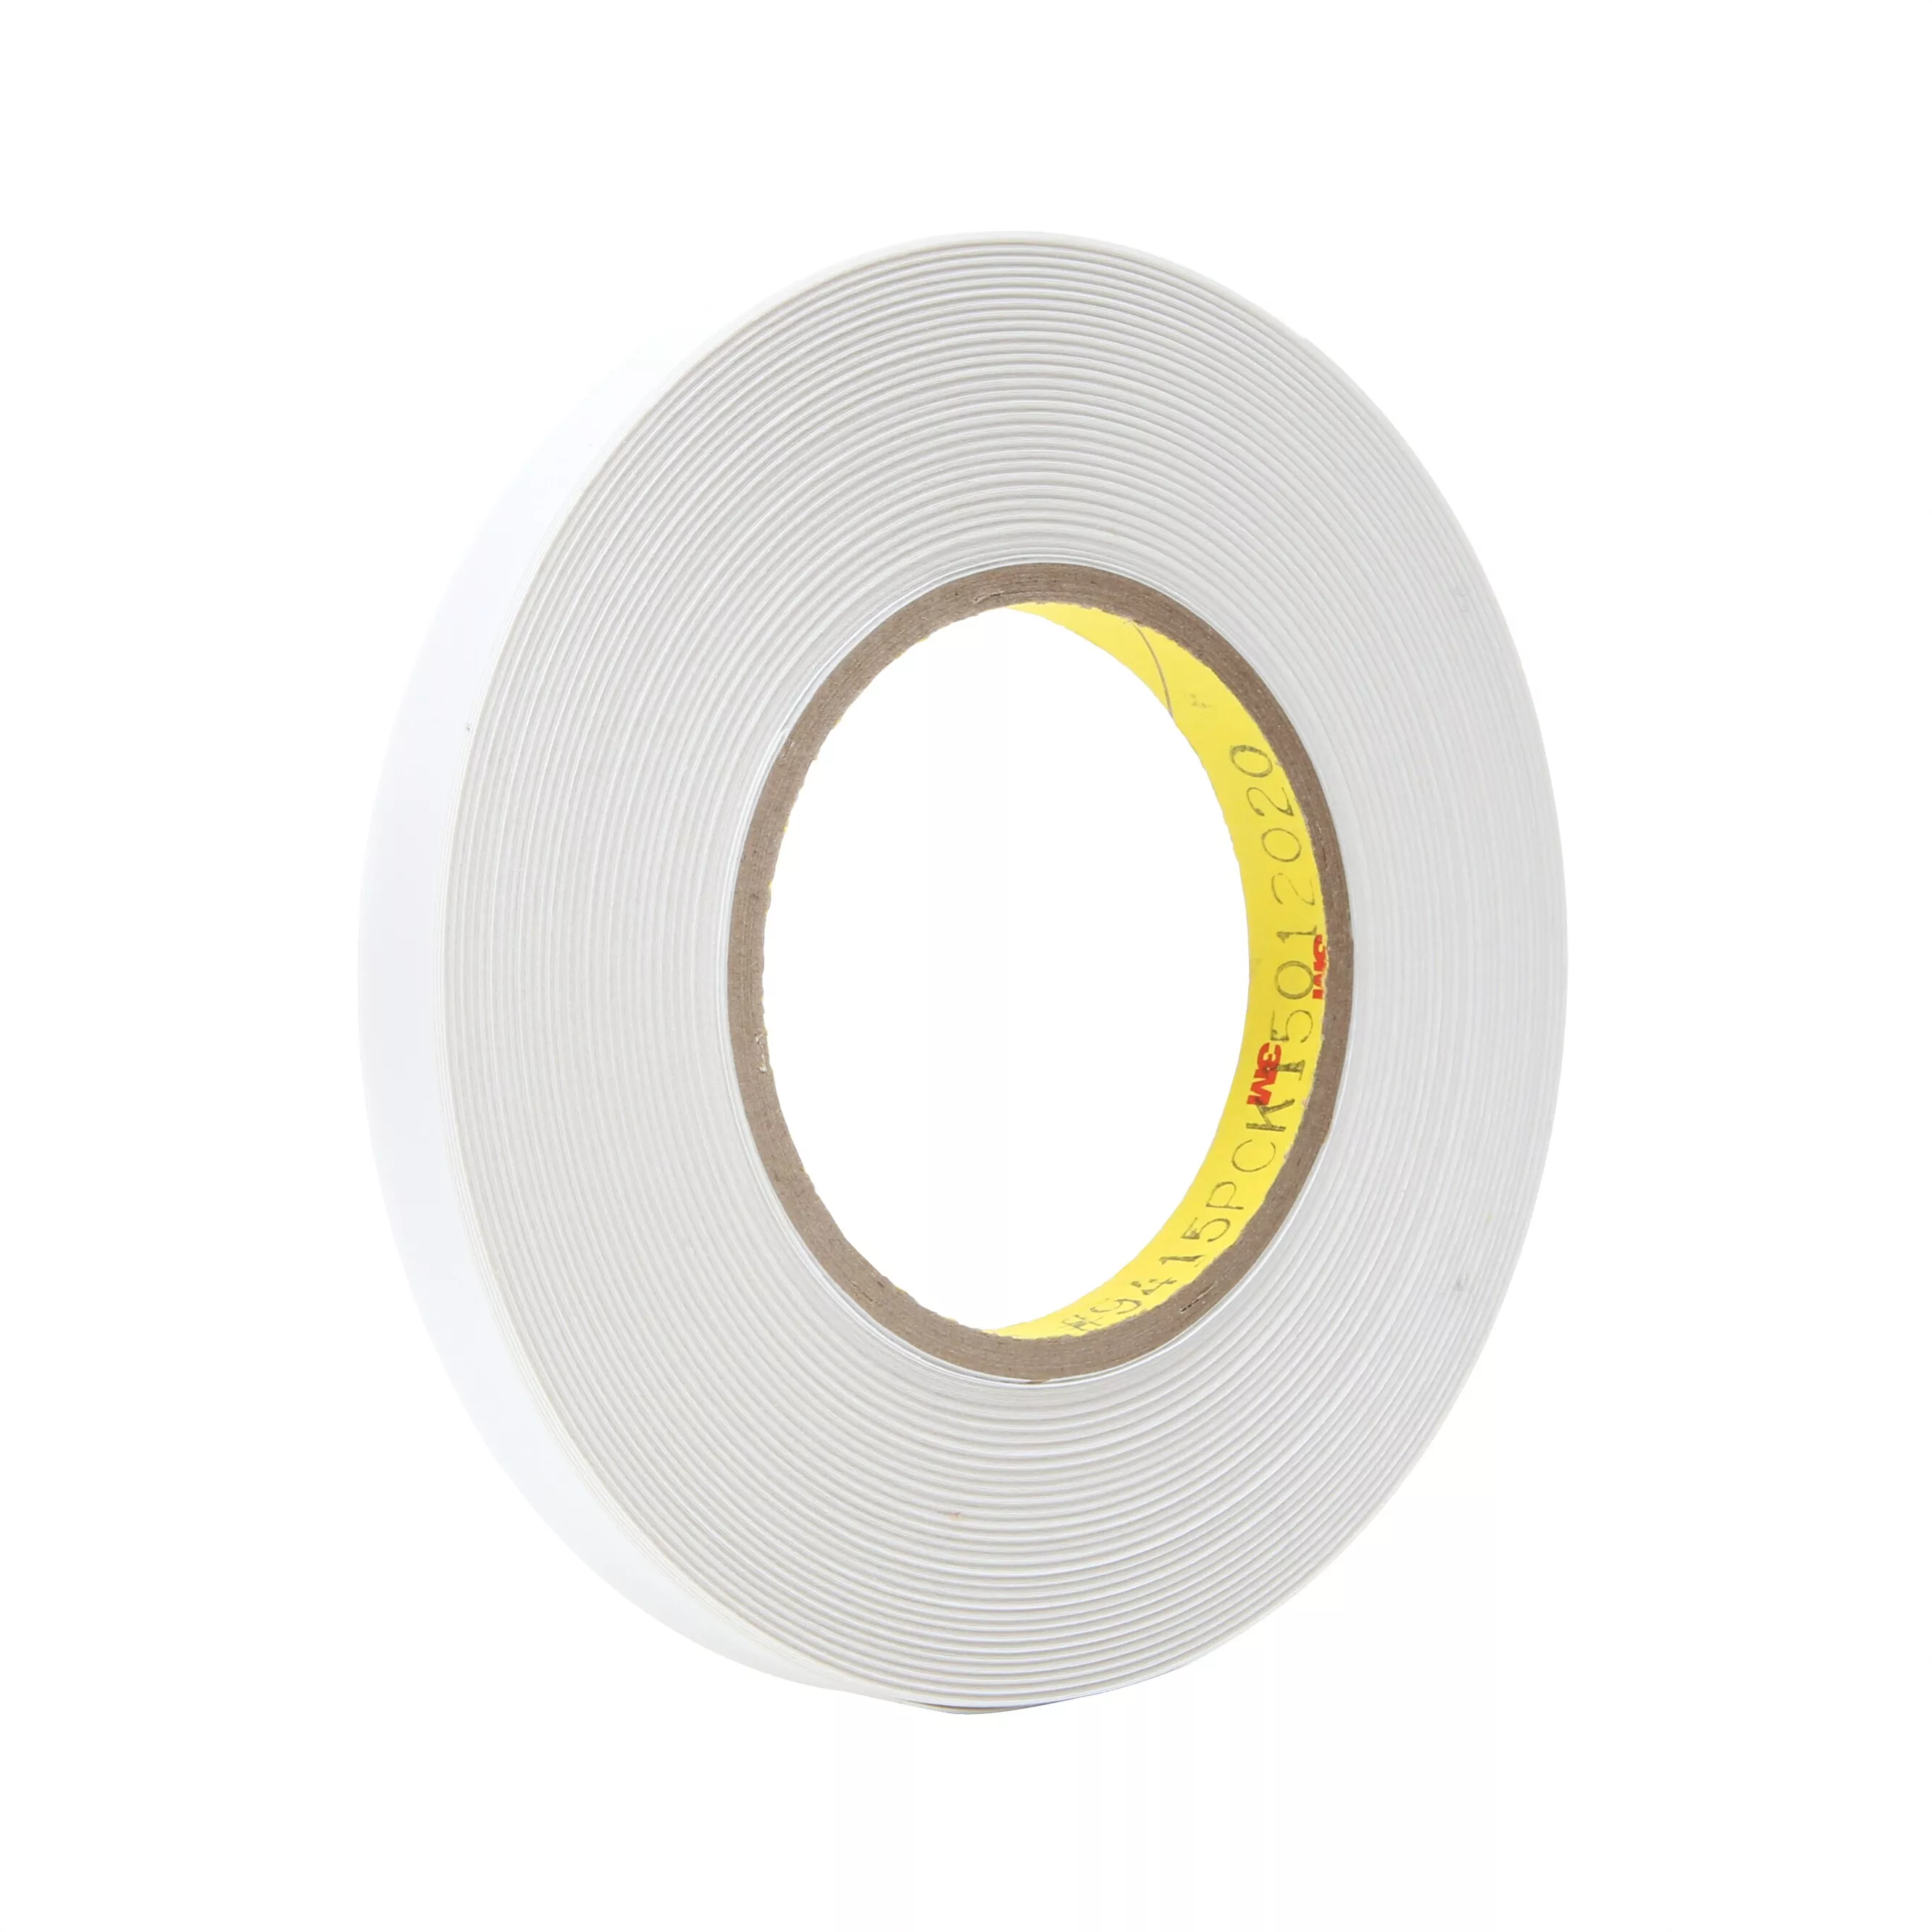 SKU 7000048535 | 3M™ Removable Repositionable Tape 9416